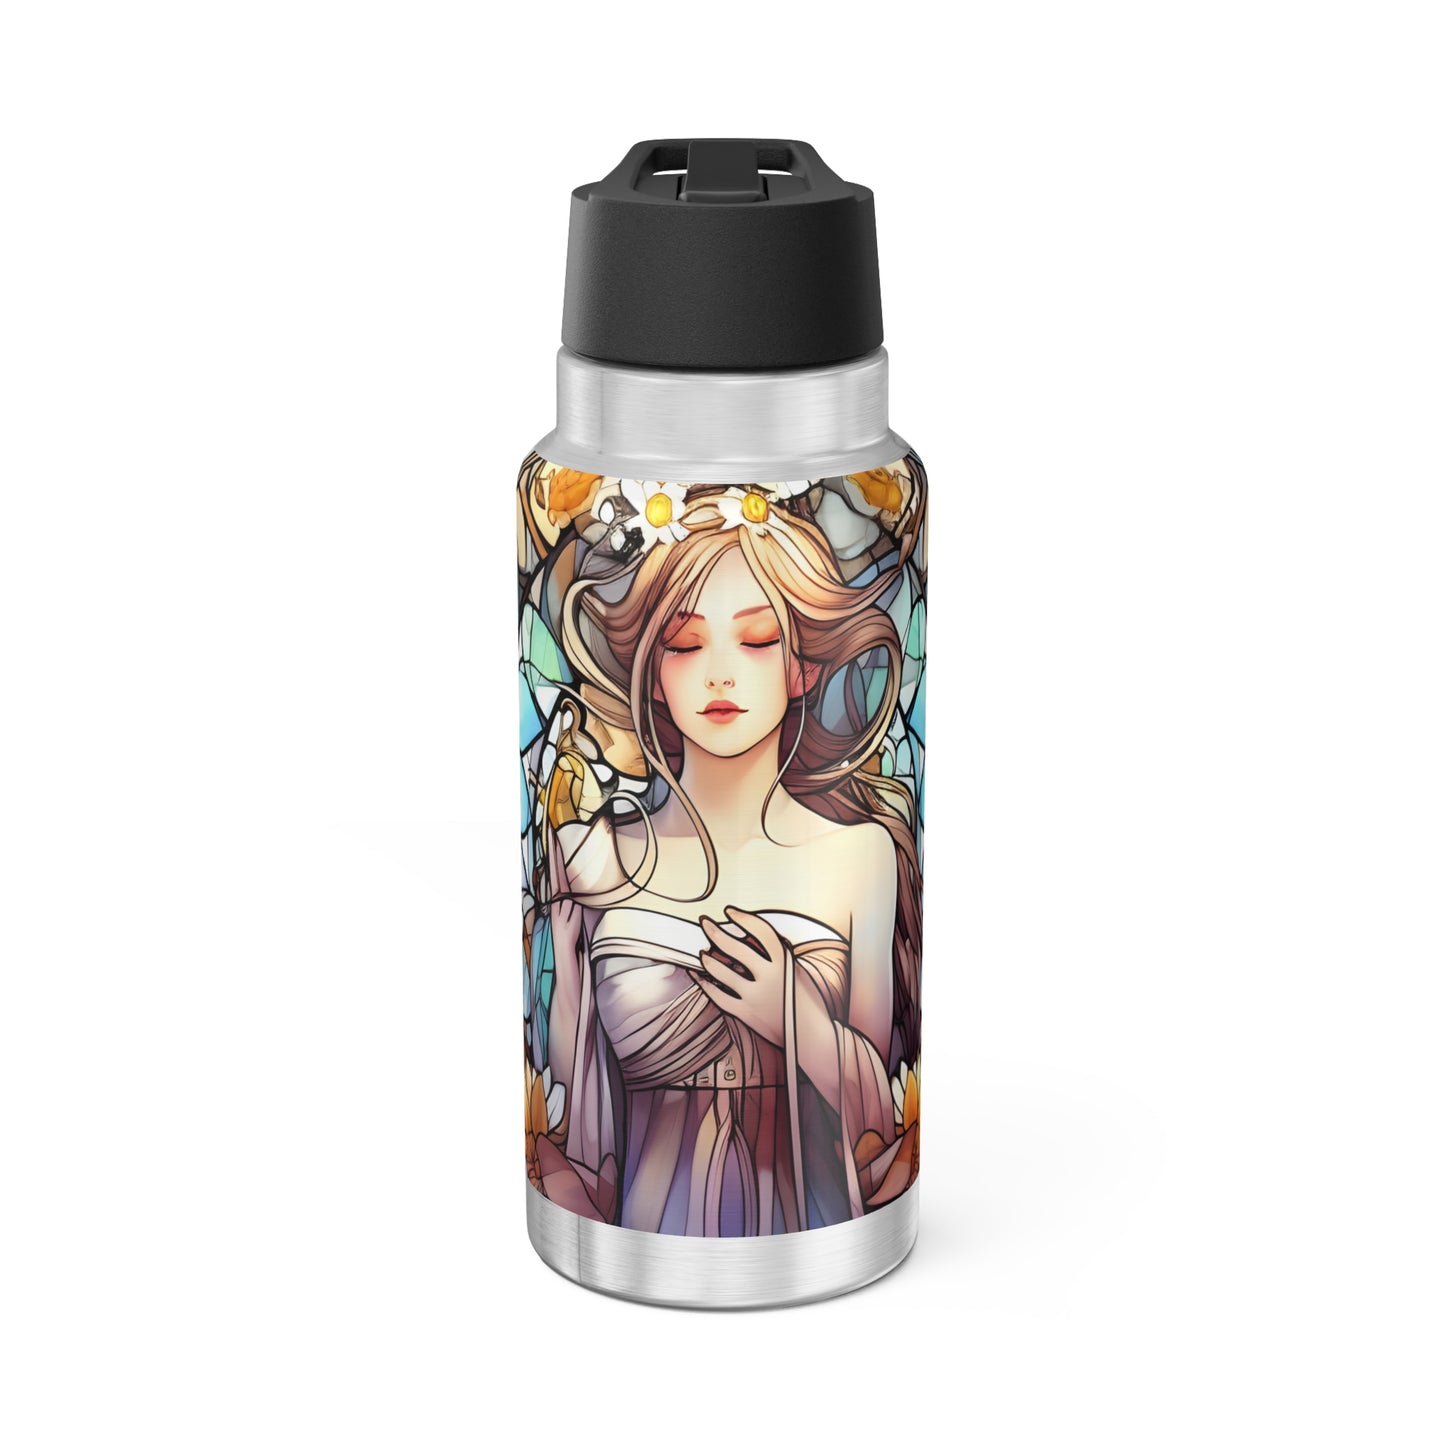 Virgo Zodiac Sign in White Dress Stained Glass Illustration ~ 32oz Tumbler With Lid and Straw